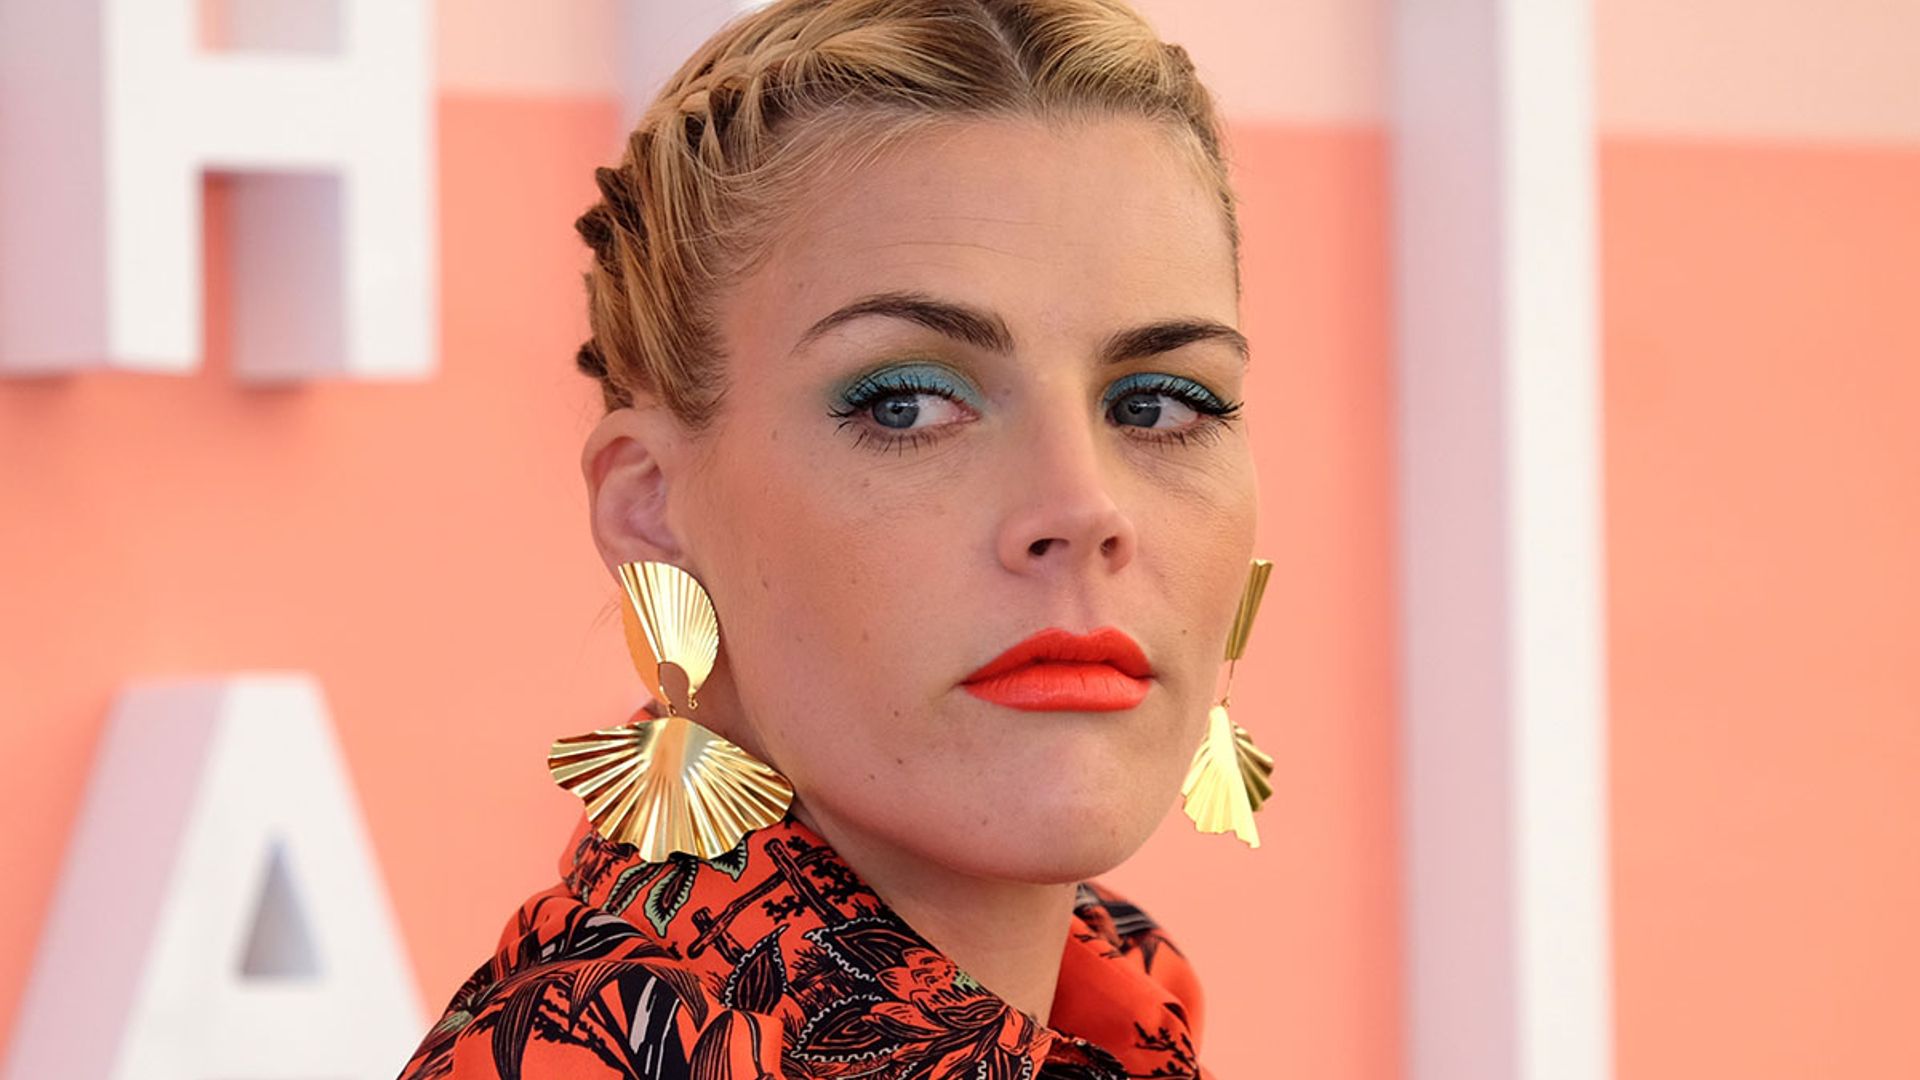 Busy Philipps' child Birdie makes major fashion statement – and fans love it